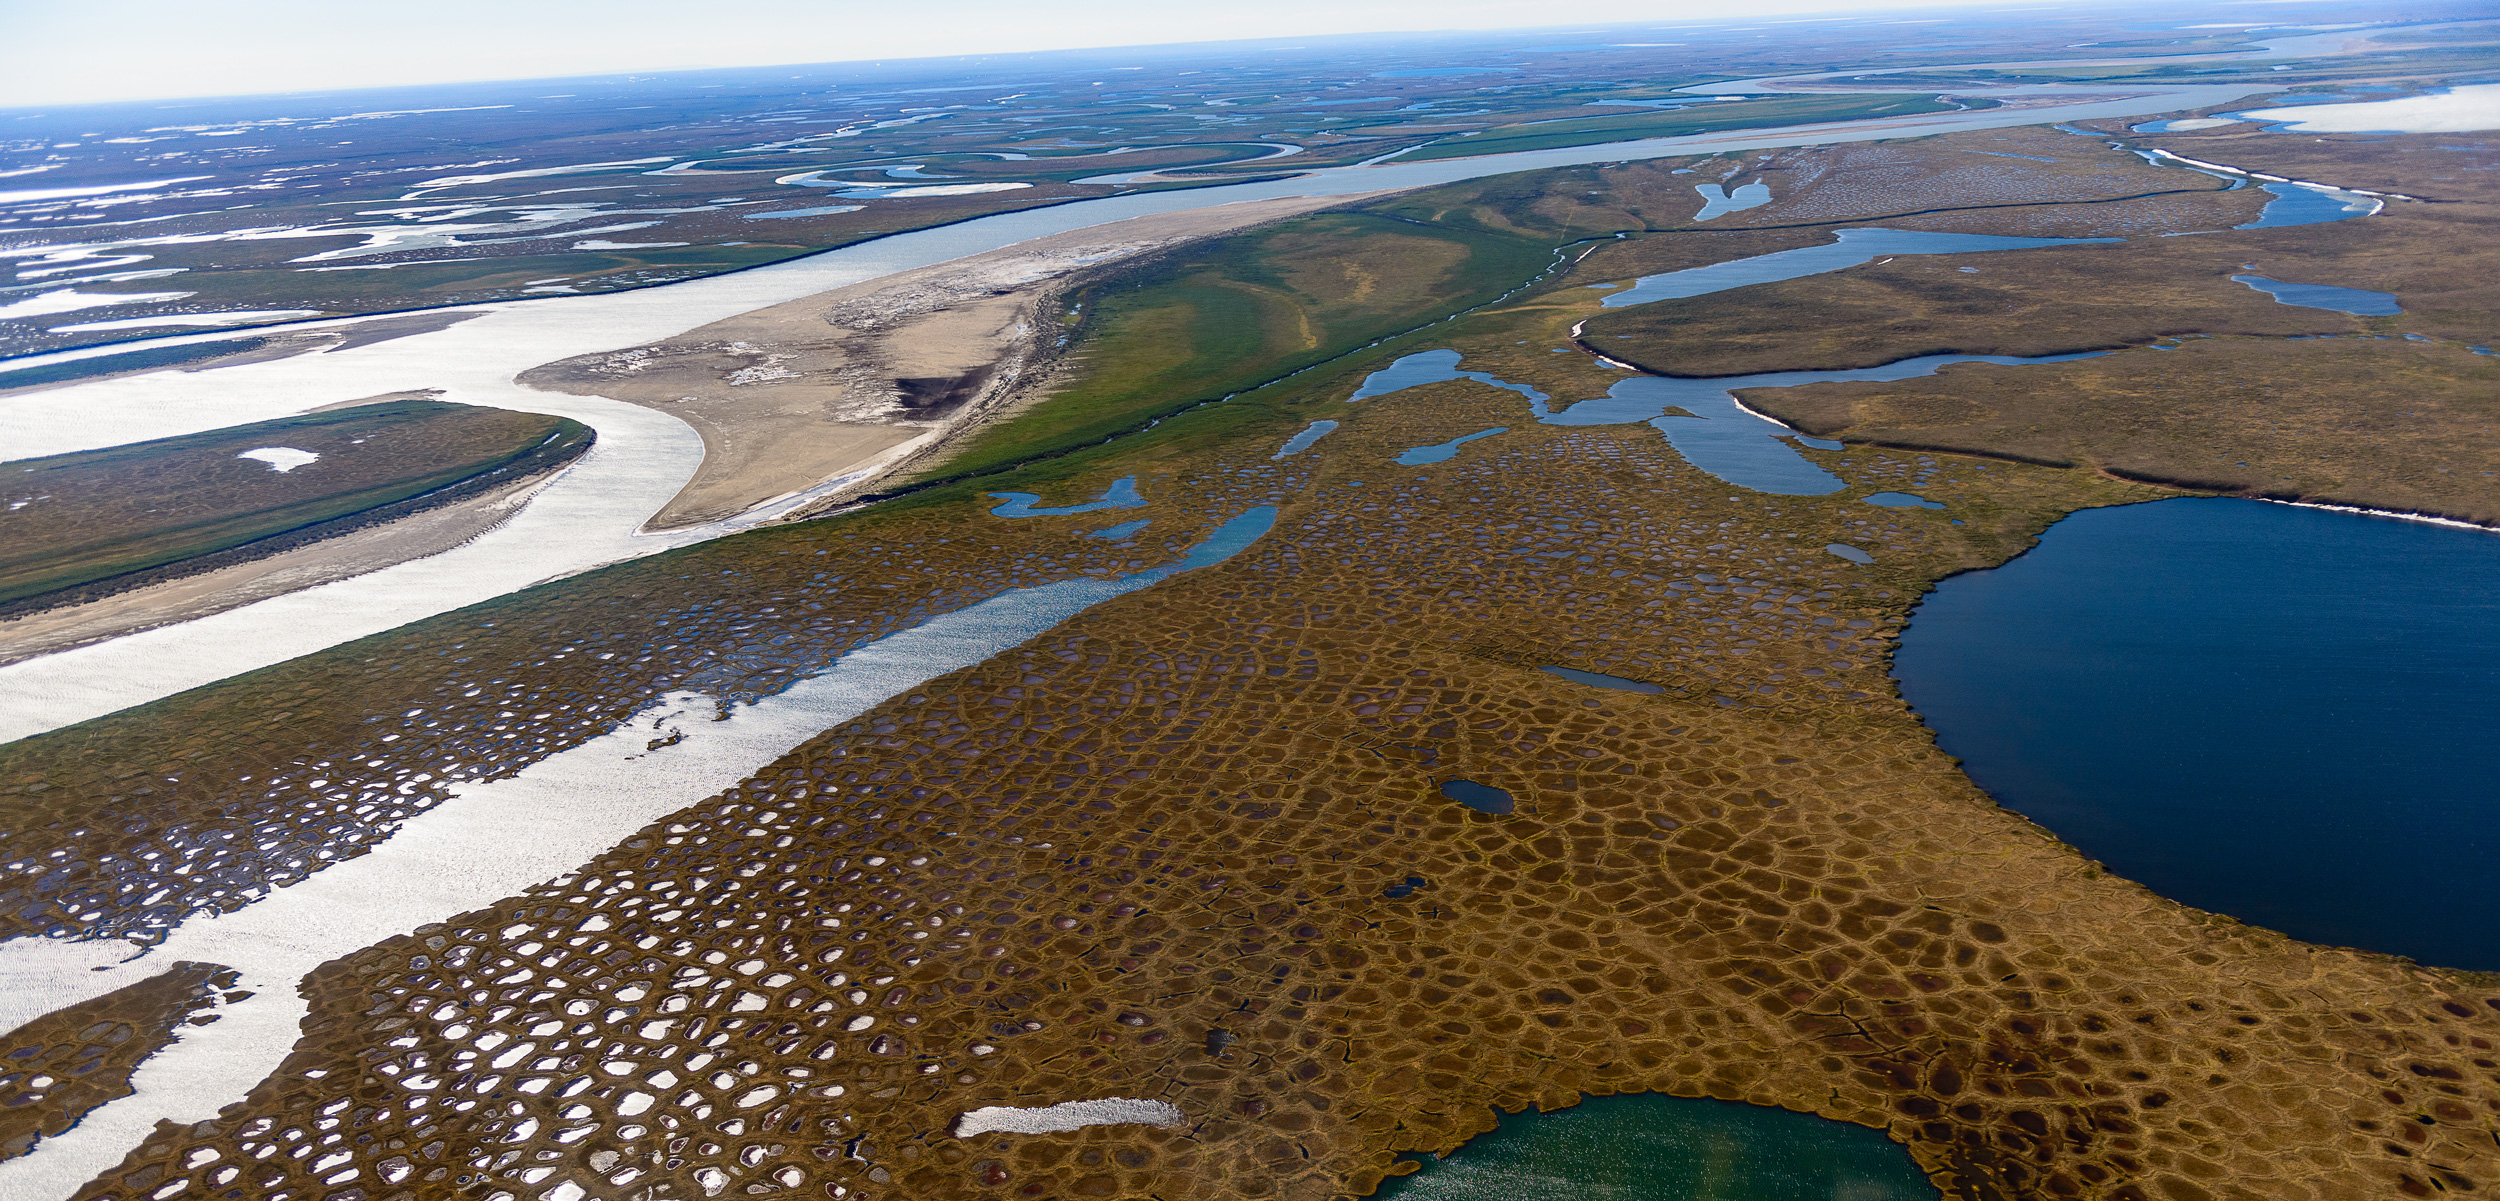 Thaw lakes and patterned ground surrounding the Colville River at the edge of the National Petroleum Reserve on Alaska’s North Slope. More than 40 percent of the carbon dioxide entering the atmosphere from the Arctic comes from its surface waters.